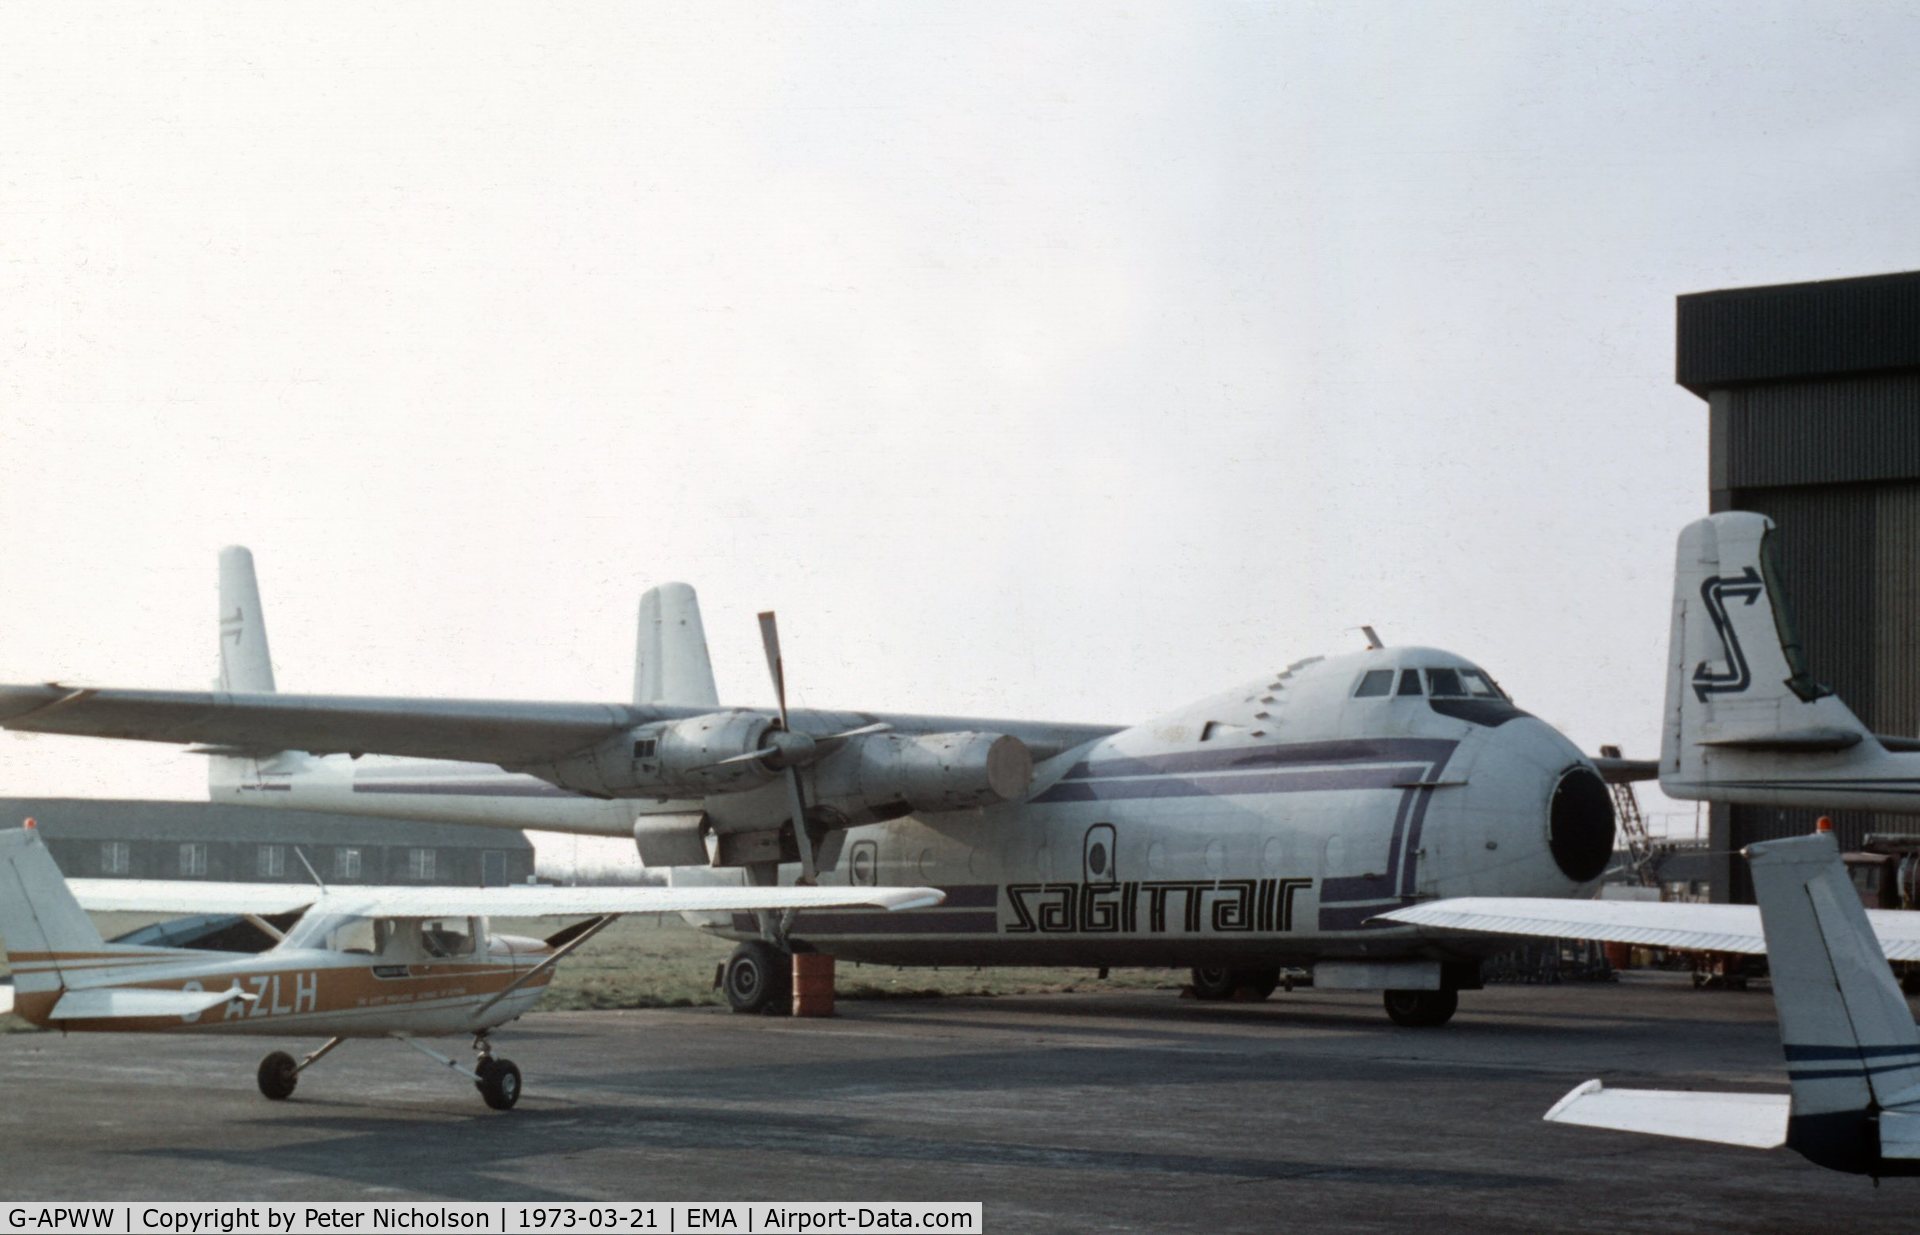 G-APWW, 1960 Armstrong Whitworth AW650 Argosy 101 C/N 6656, Argosy 101 of Sagittair at East Midlands Airport in March 1973 - this carrier ceased operations on September 8, 1972 and in May 1974 this Argosy transfered to Australia as VH-BBA.